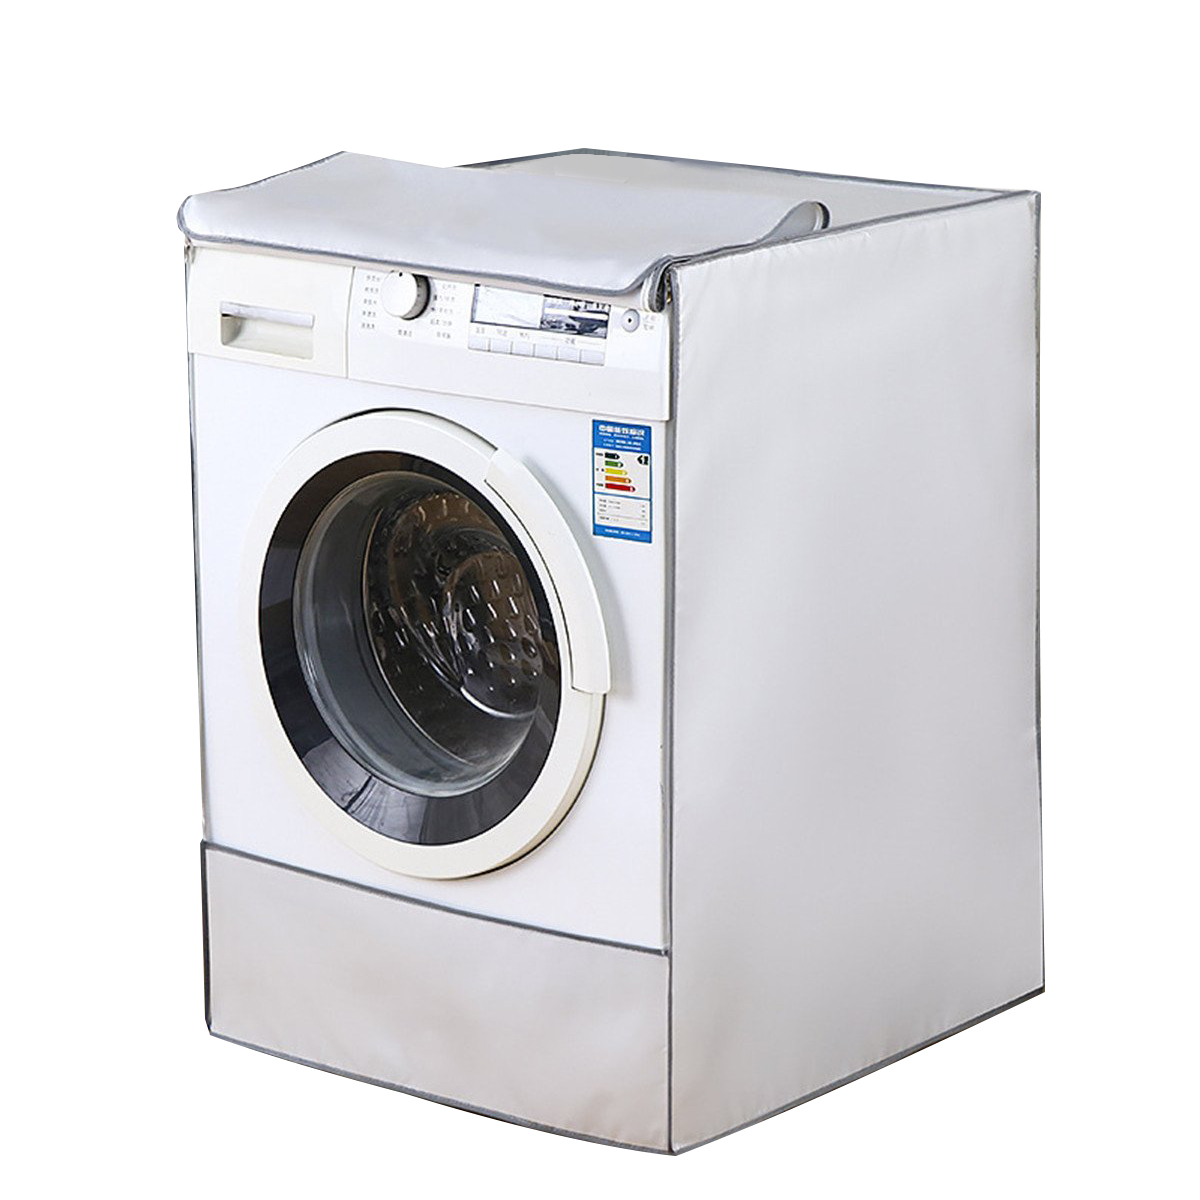 Find Washing Machine Cover Waterproof Automatic Washing Machine Dust proof Protective Cover for Sale on Gipsybee.com with cryptocurrencies